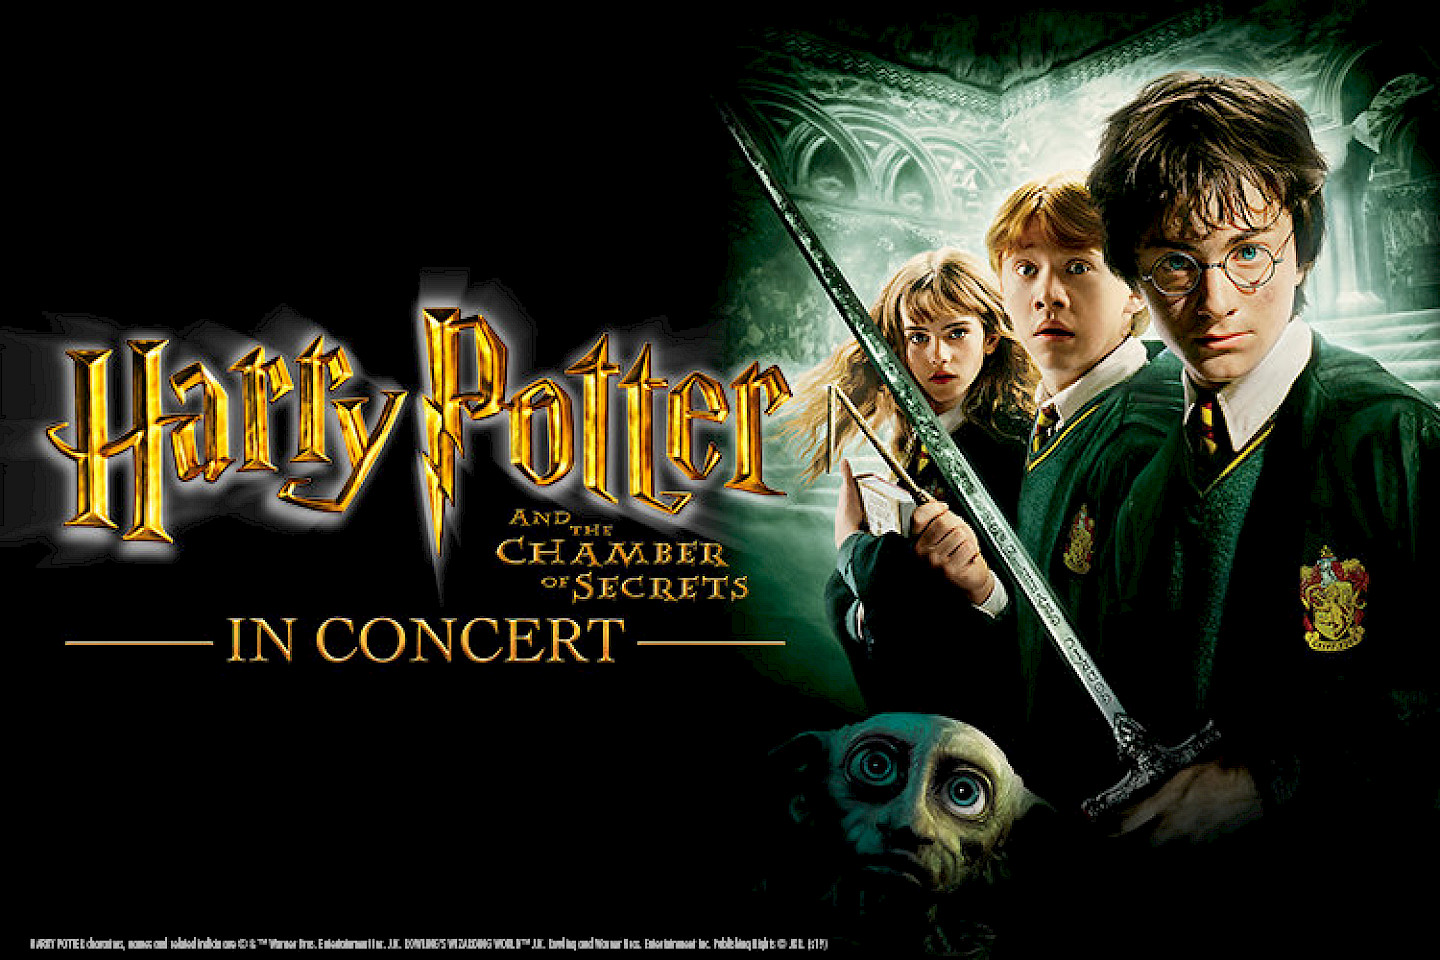 Harry Potter and the Chamber of Secrets - in Concert